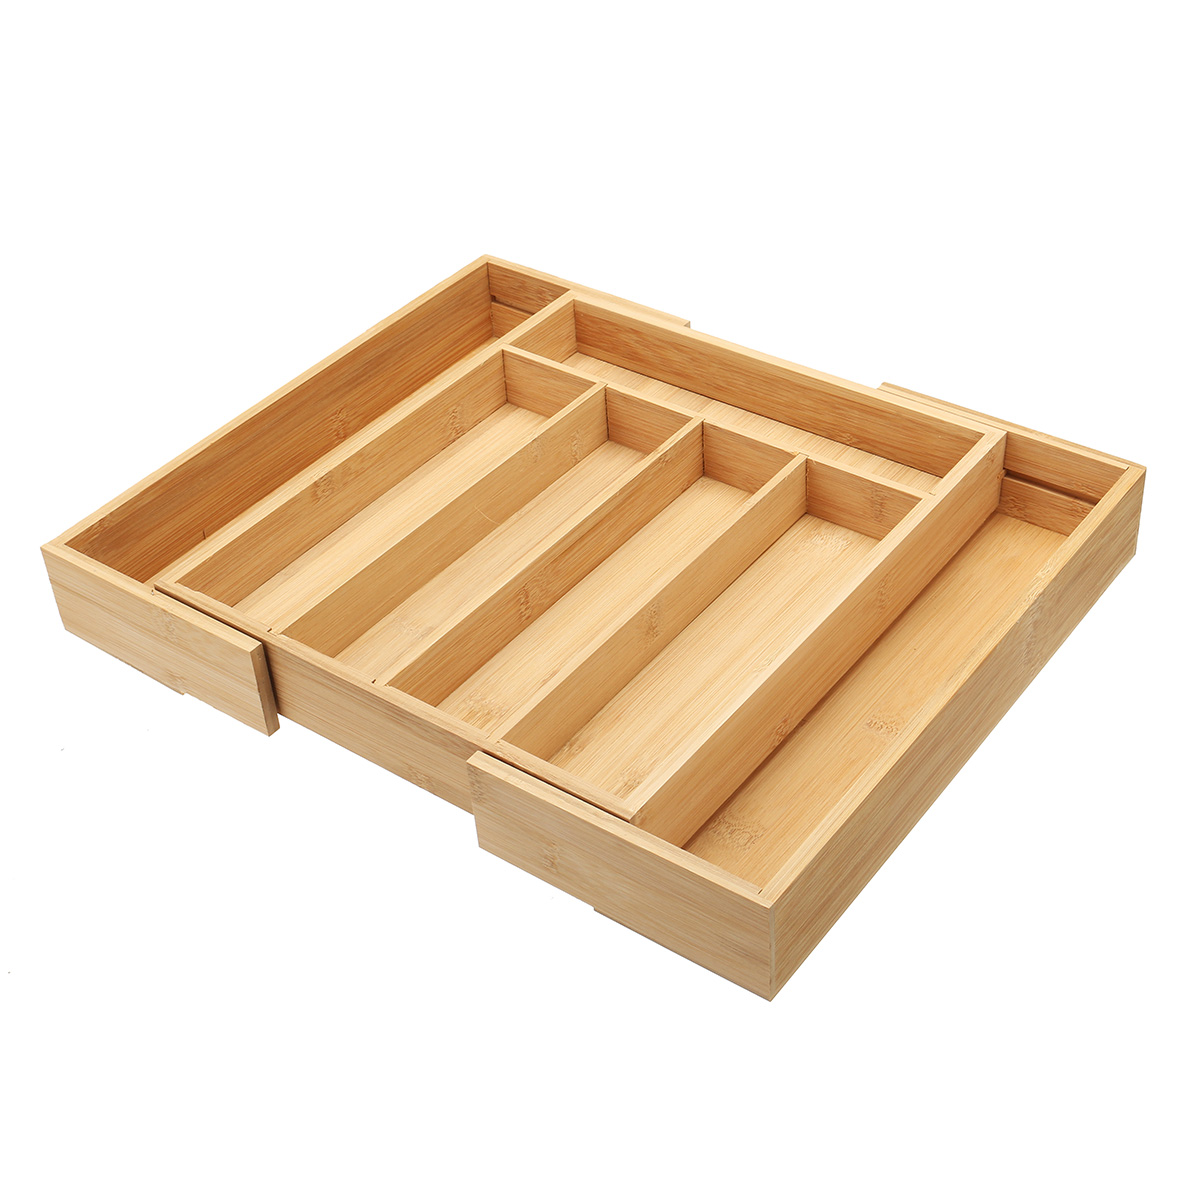 Find 7 Cells Wooden Cutlery Drawer Draw Organiser Bamboo Expandable Tray for Sale on Gipsybee.com with cryptocurrencies